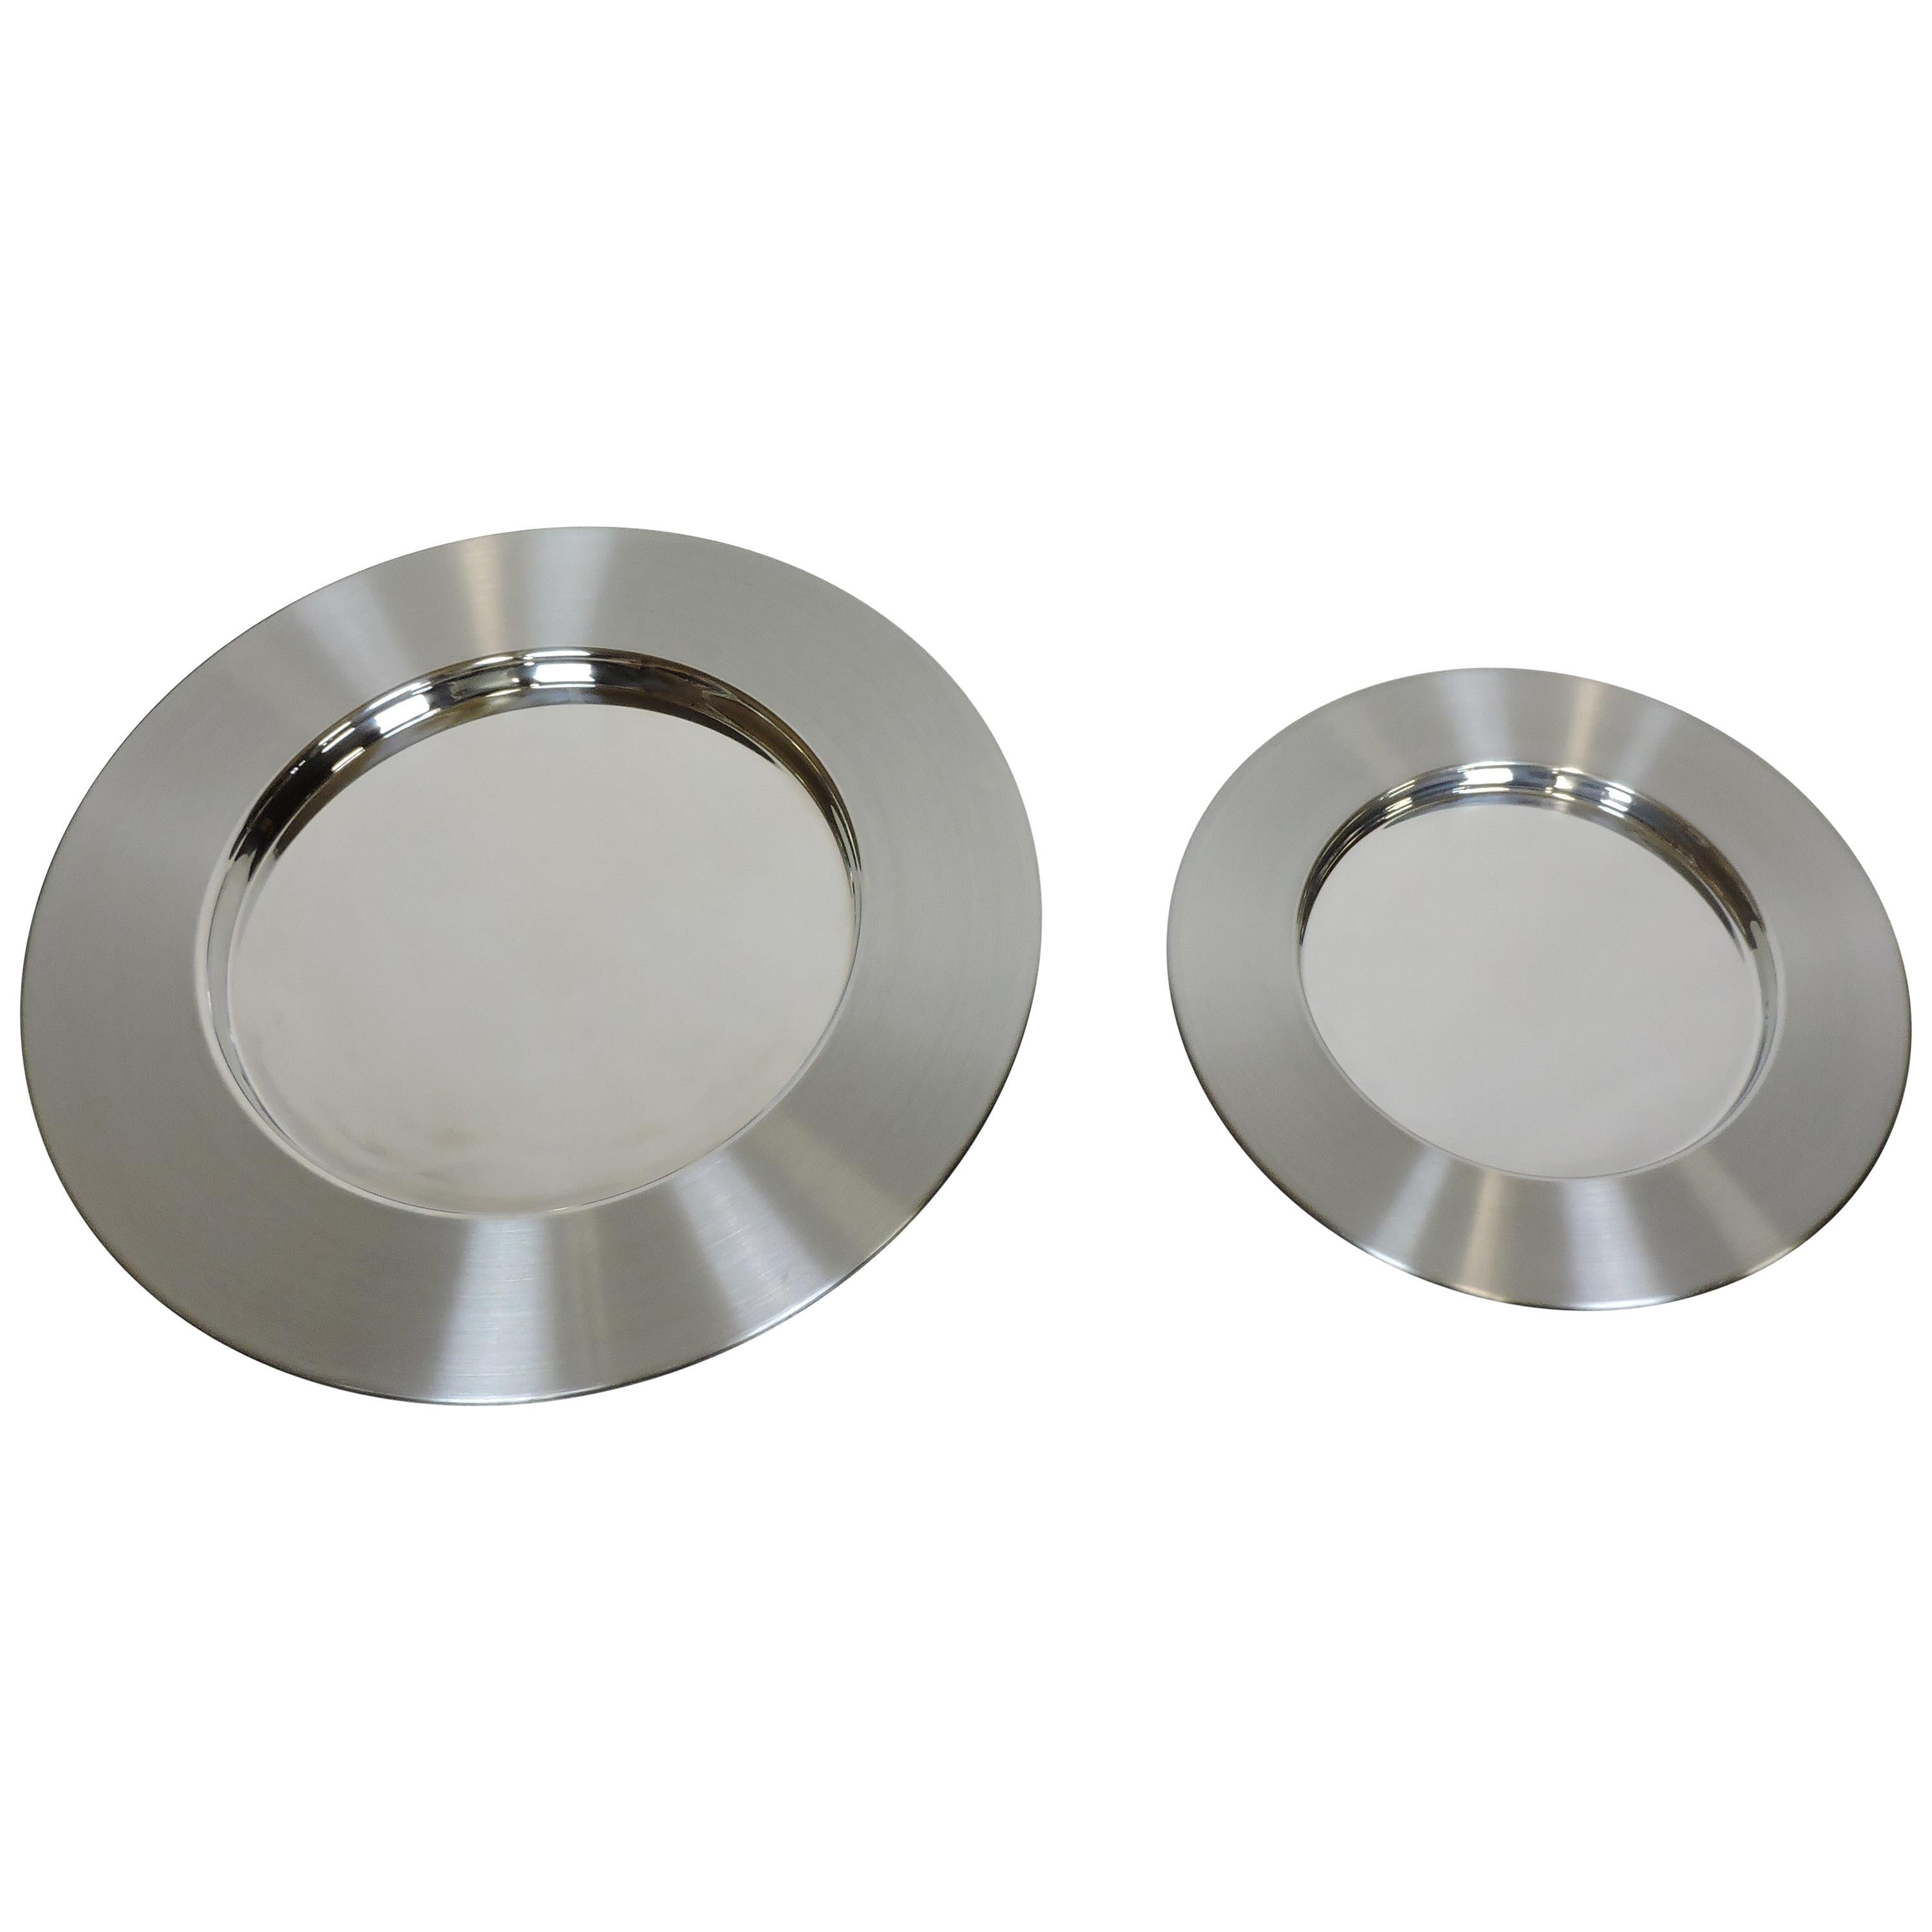 Two Timo Sarpaneva Scandinavian Modern Large Stainless Steel Chargers Platters For Sale